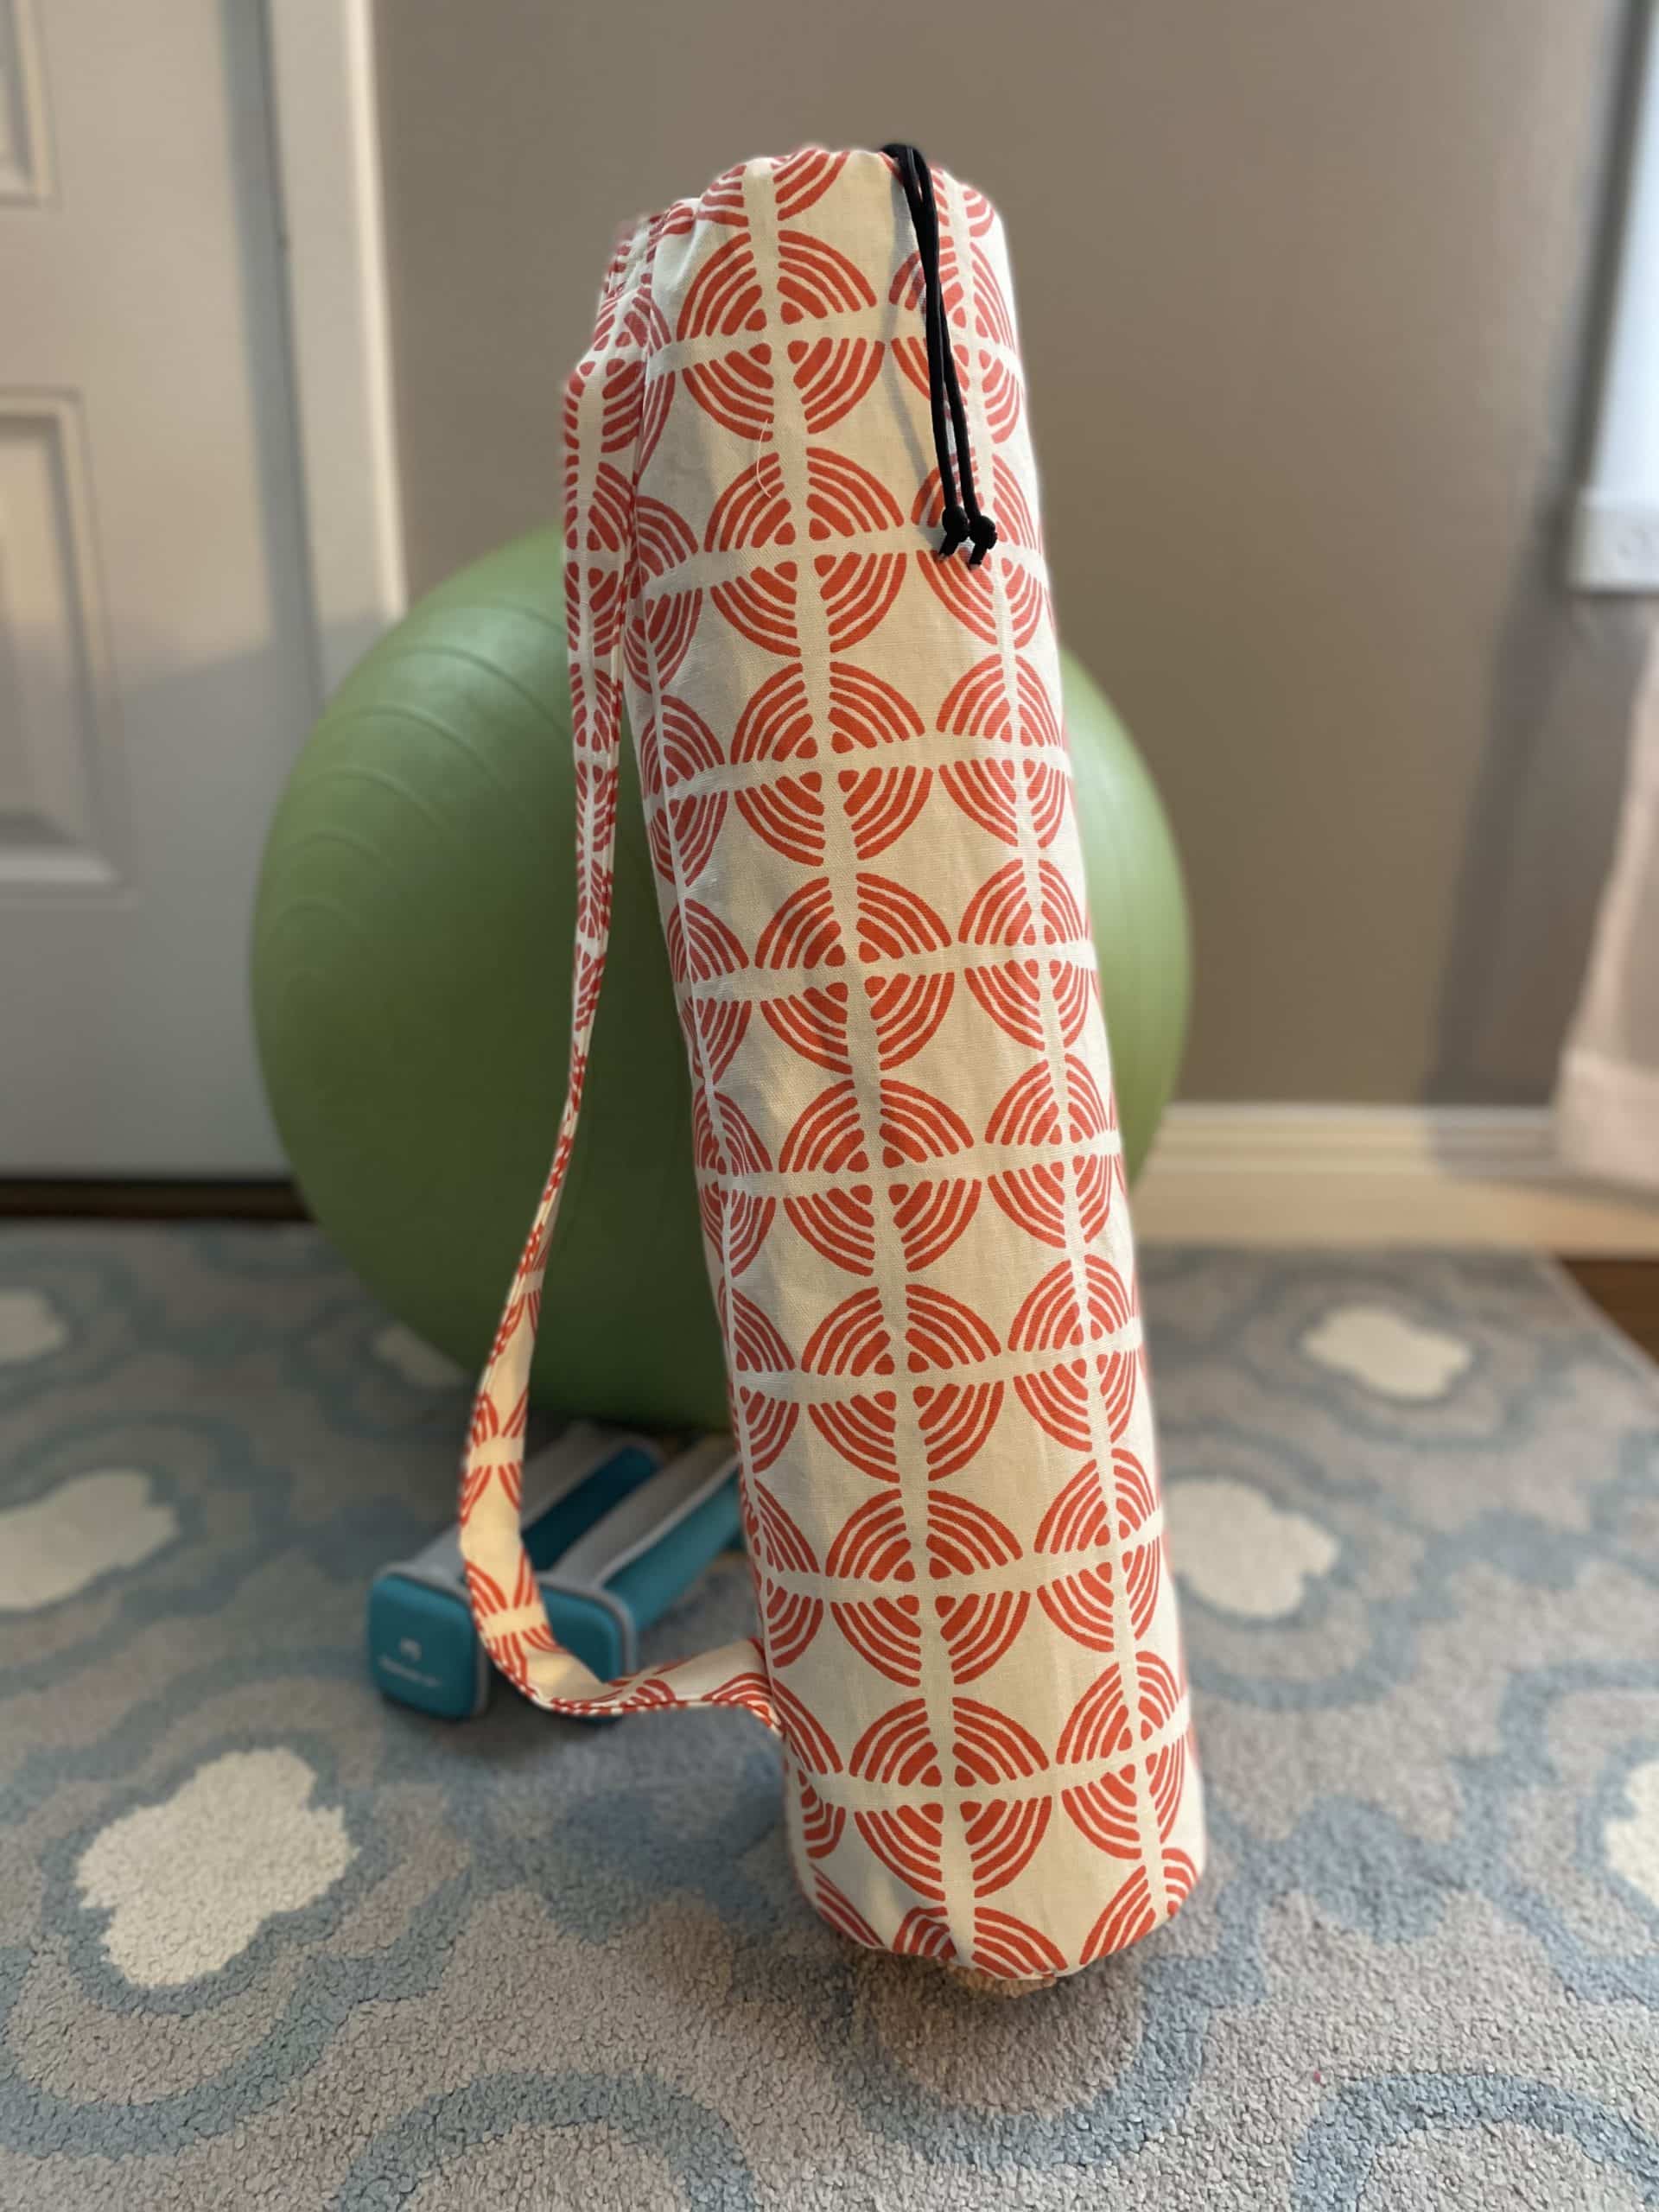 Reuse Of Track Pant Into Yoga Mat Bag /No Sew//DIY//Best Out Of Waste//#2 